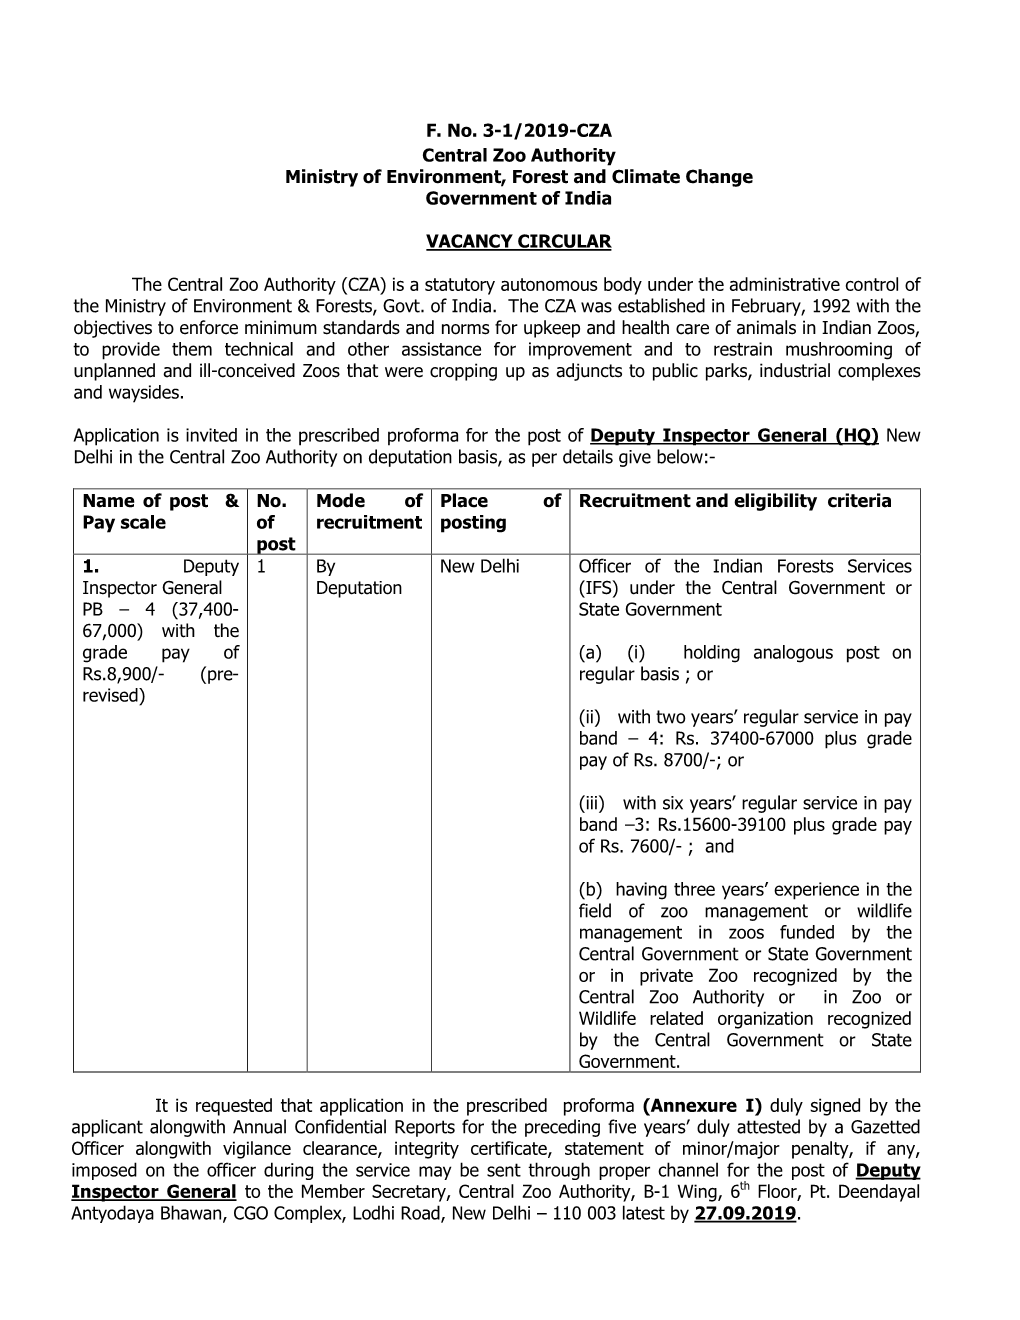 F. No. 3-1/2019-CZA Central Zoo Authority Ministry of Environment, Forest and Climate Change Government of India VACANCY CIRCULA